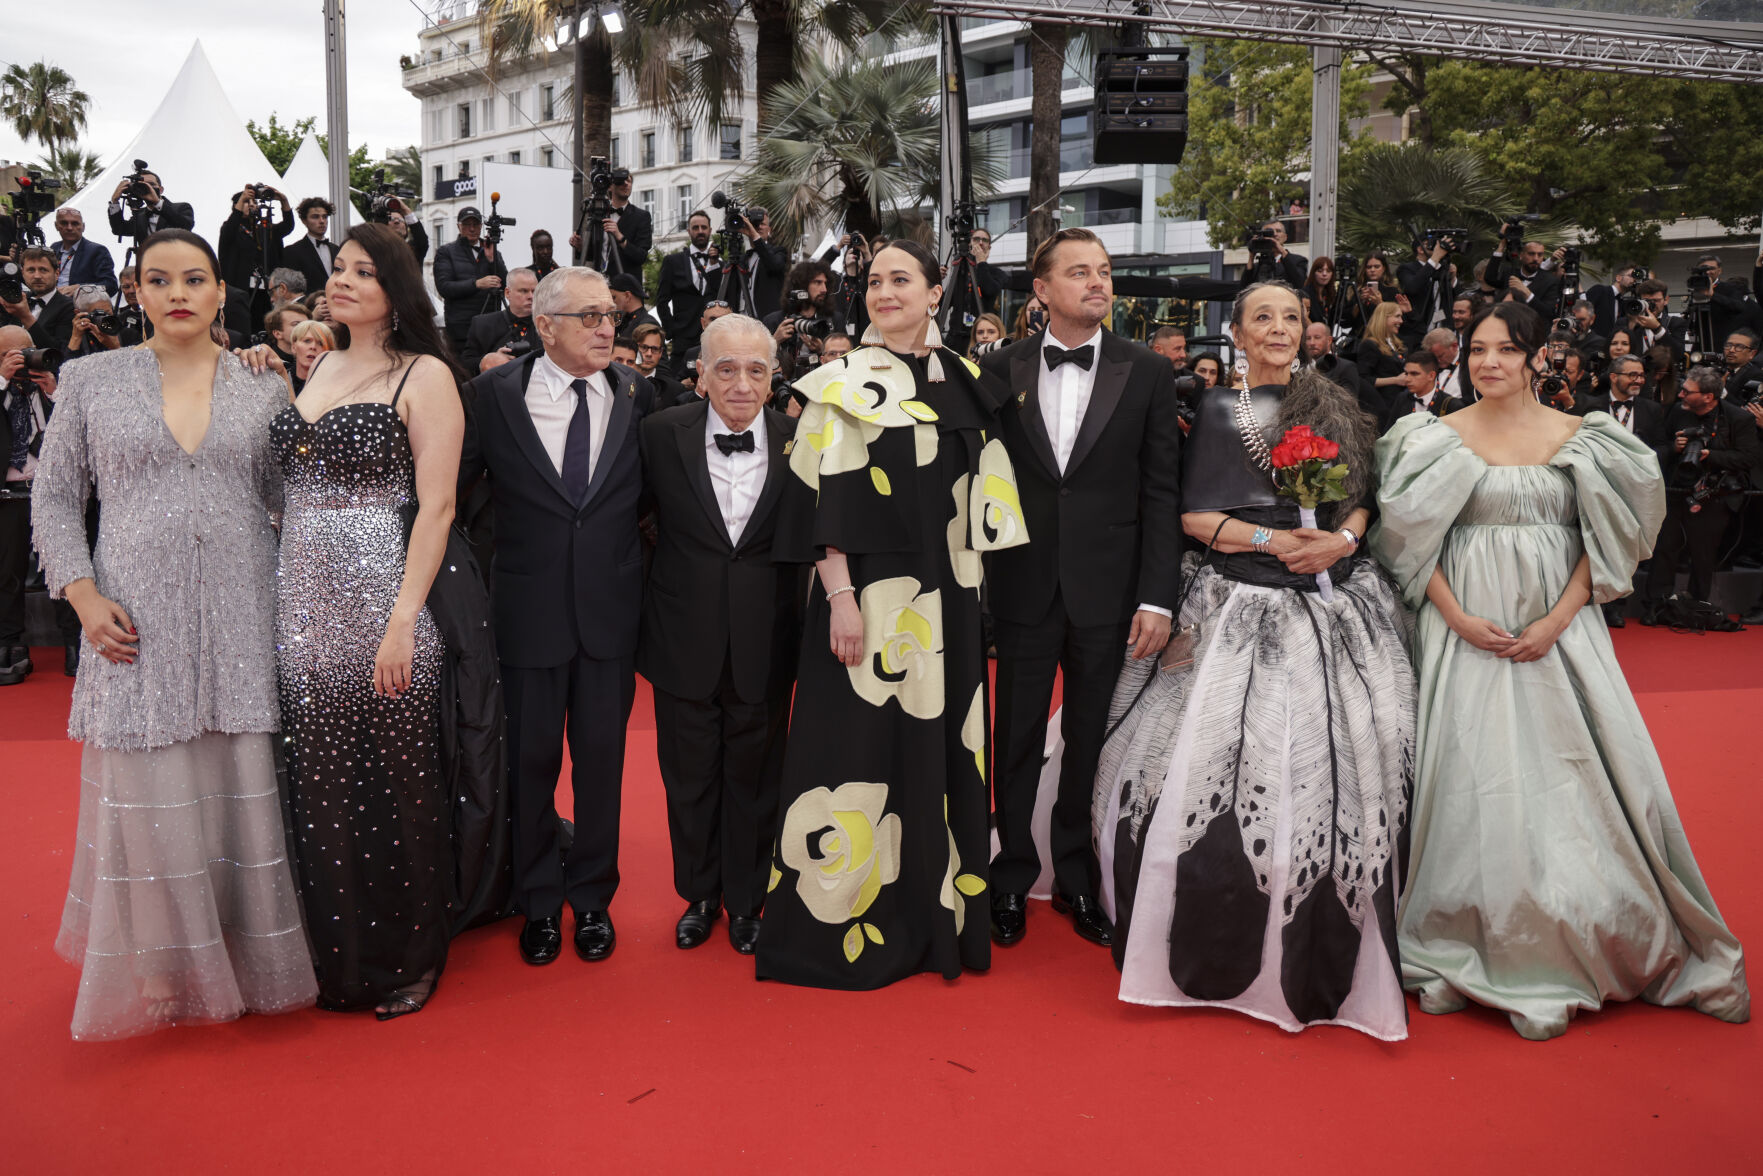 Janae Collins, from left, Cara Jade Myers, Robert De Niro, director Martin Scorsese, Lily Gladstone, Leonardo DiCaprio, Tantoo Cardinal and Jillian Dion pose for photographers upon arrival at the premiere of the film 'Killers of the Flower Moon' at the 76th international film festival, Cannes, southern France, Saturday, May 20, 2023.